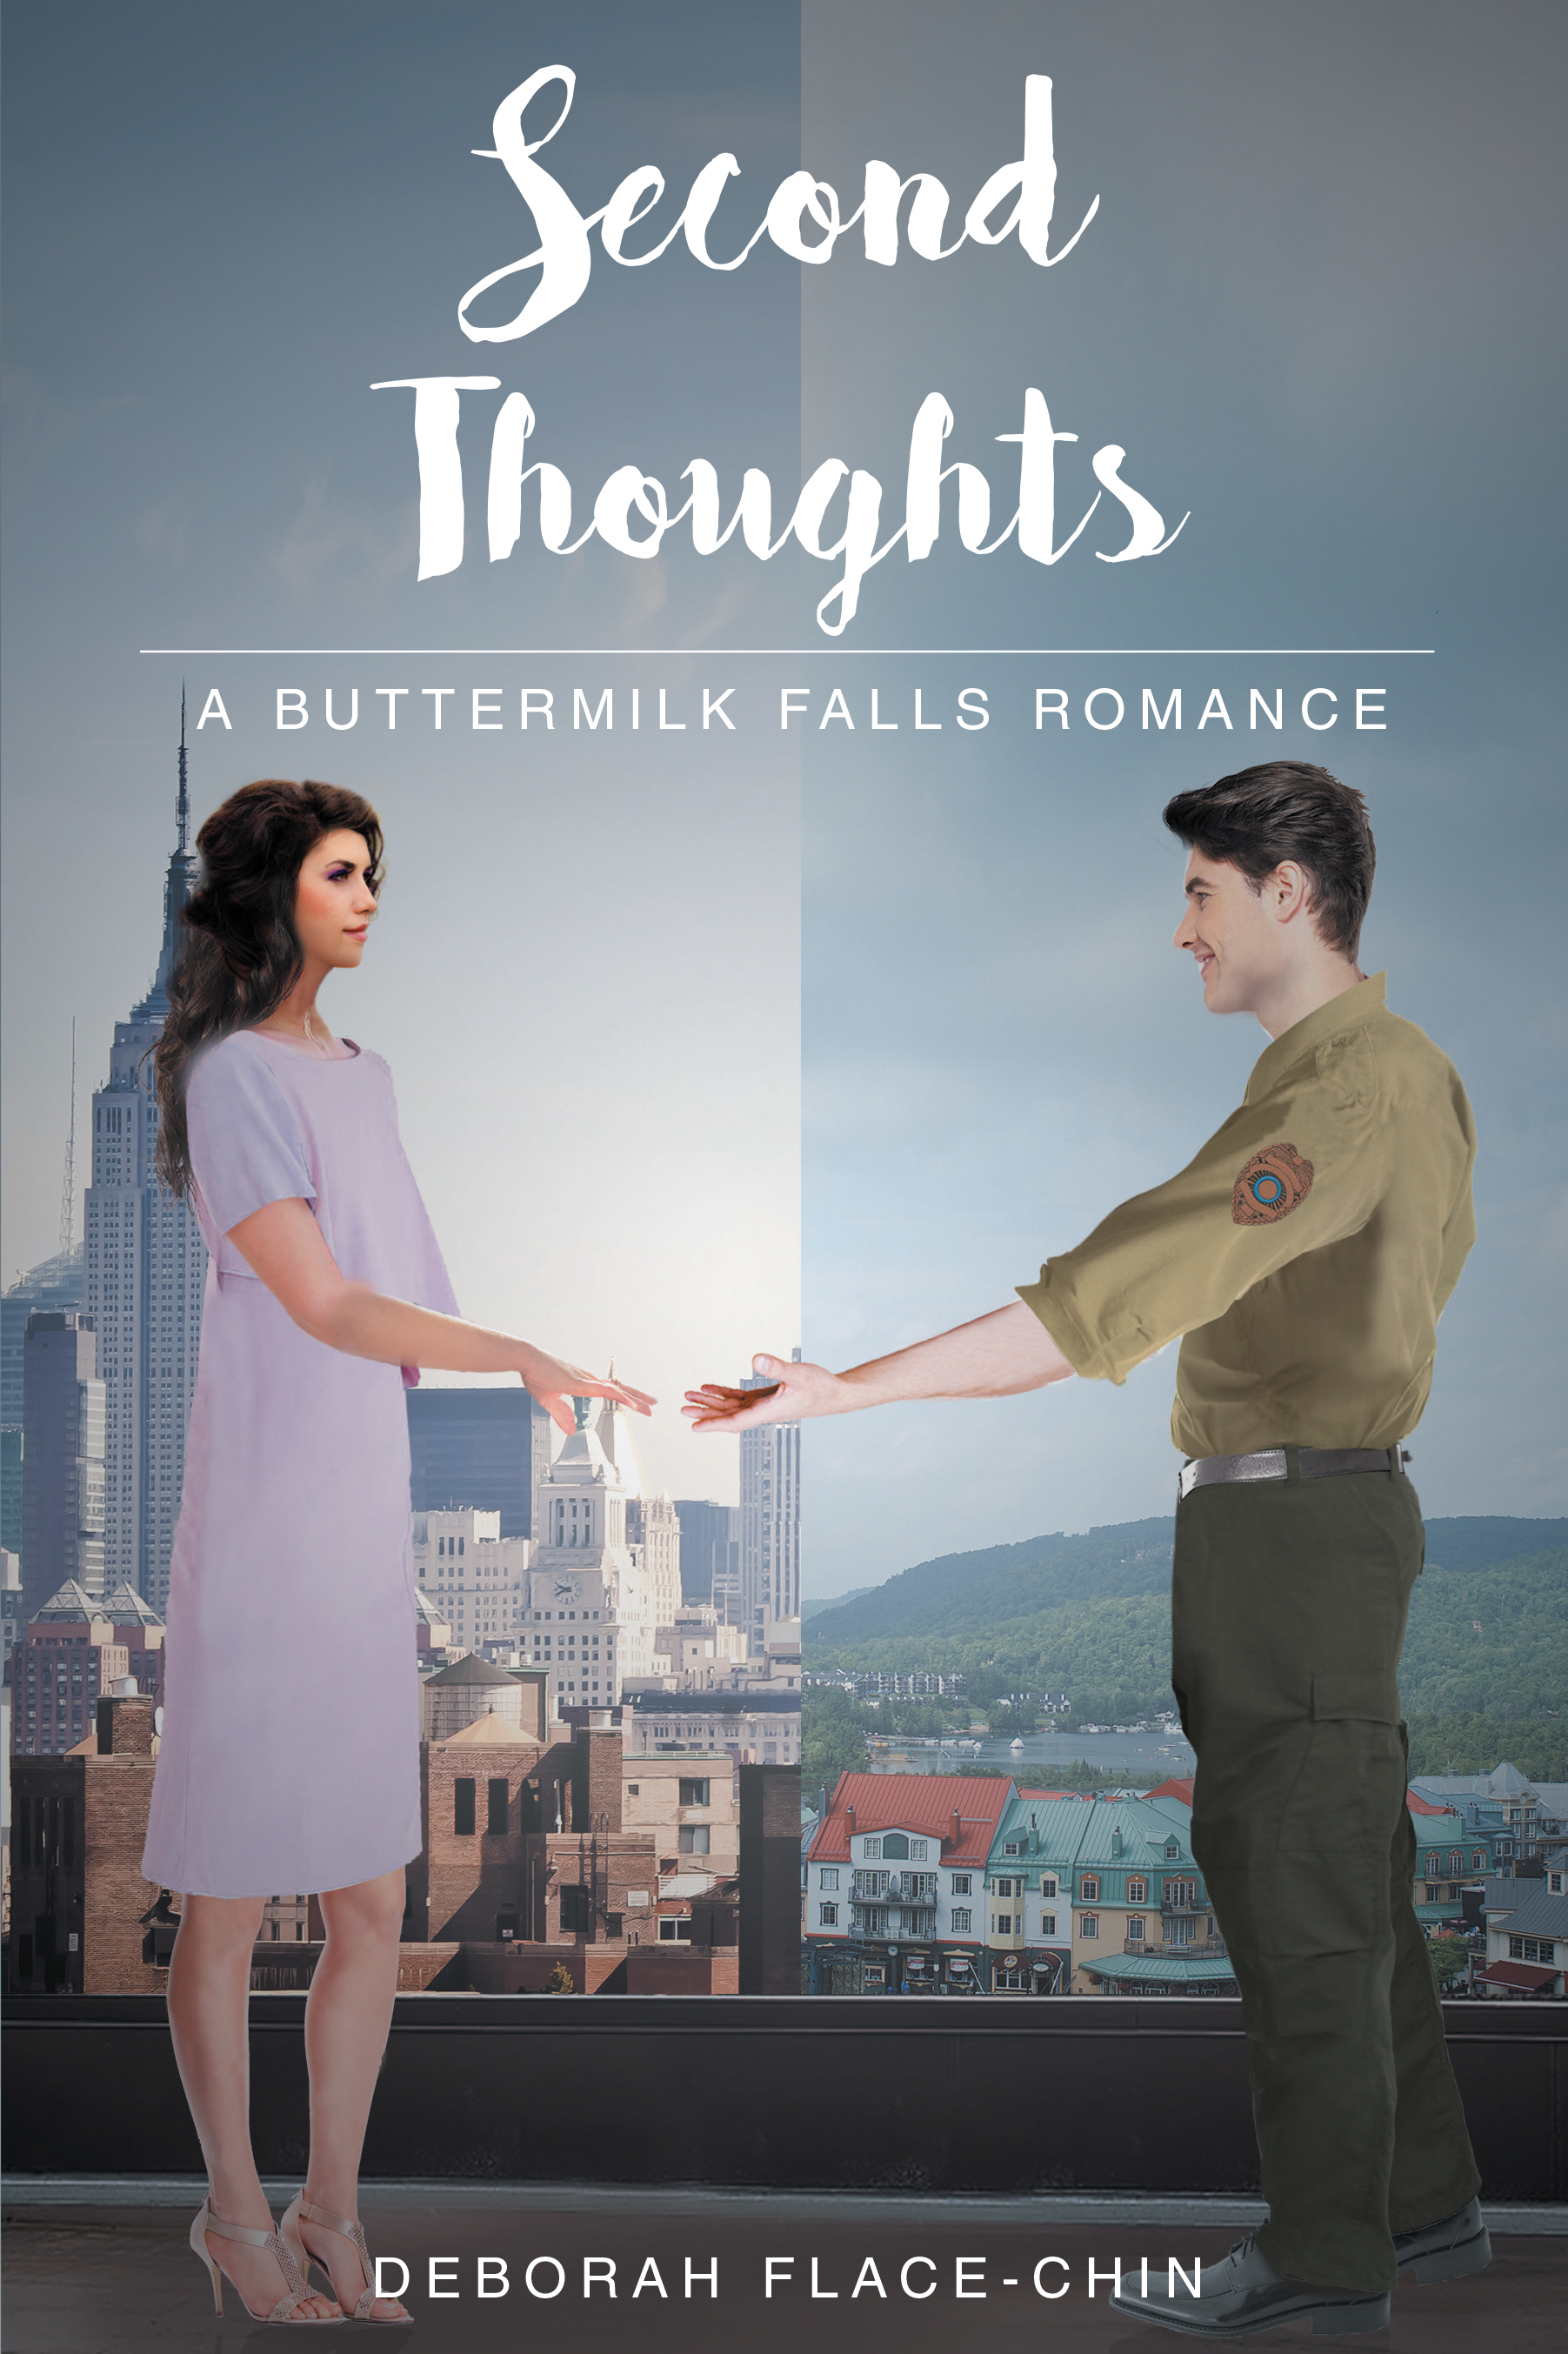 Second Thoughts Cover Image